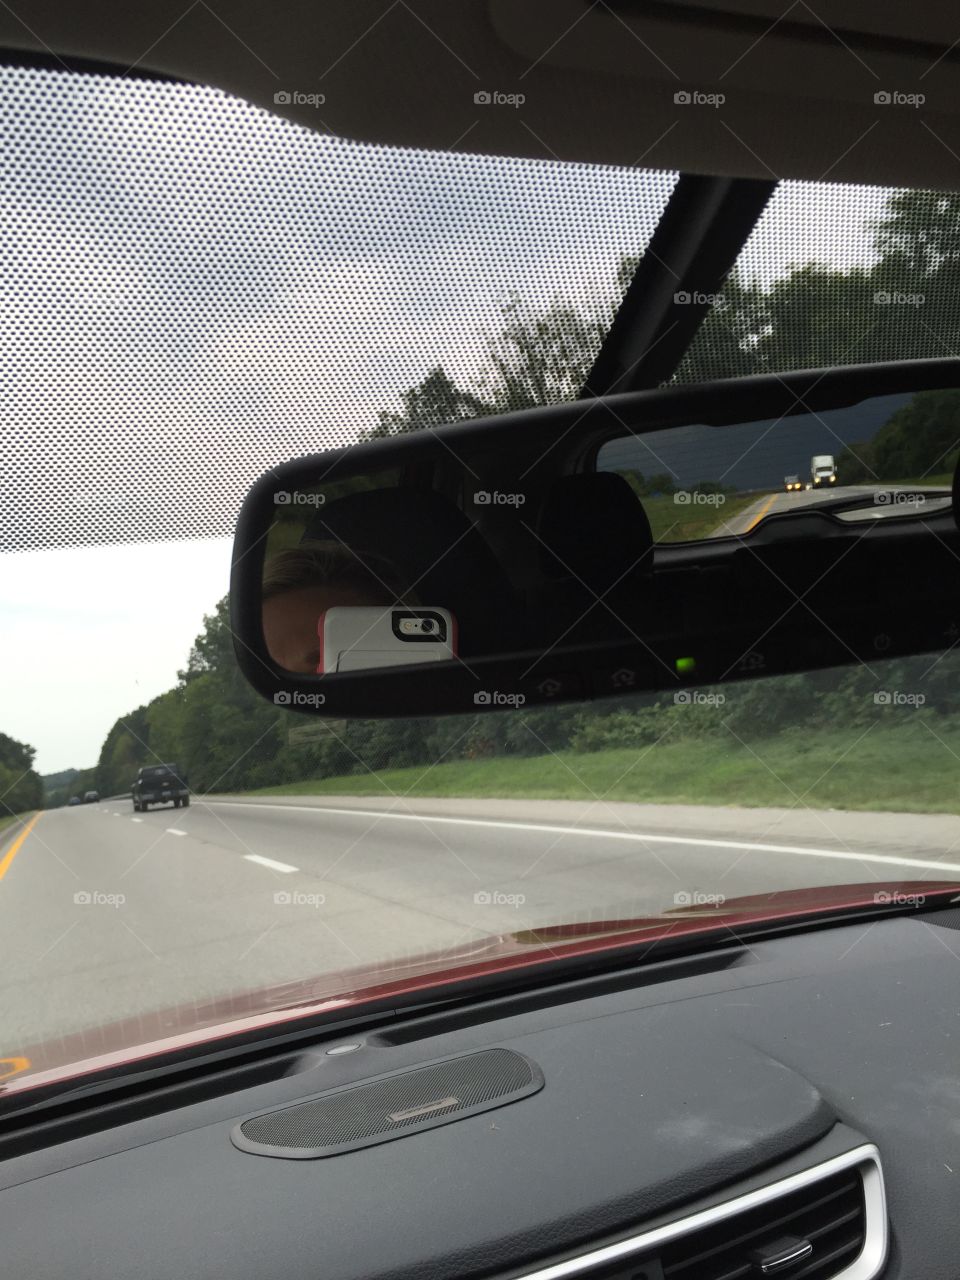 Clear skies ahead, ominous storm in the rearview